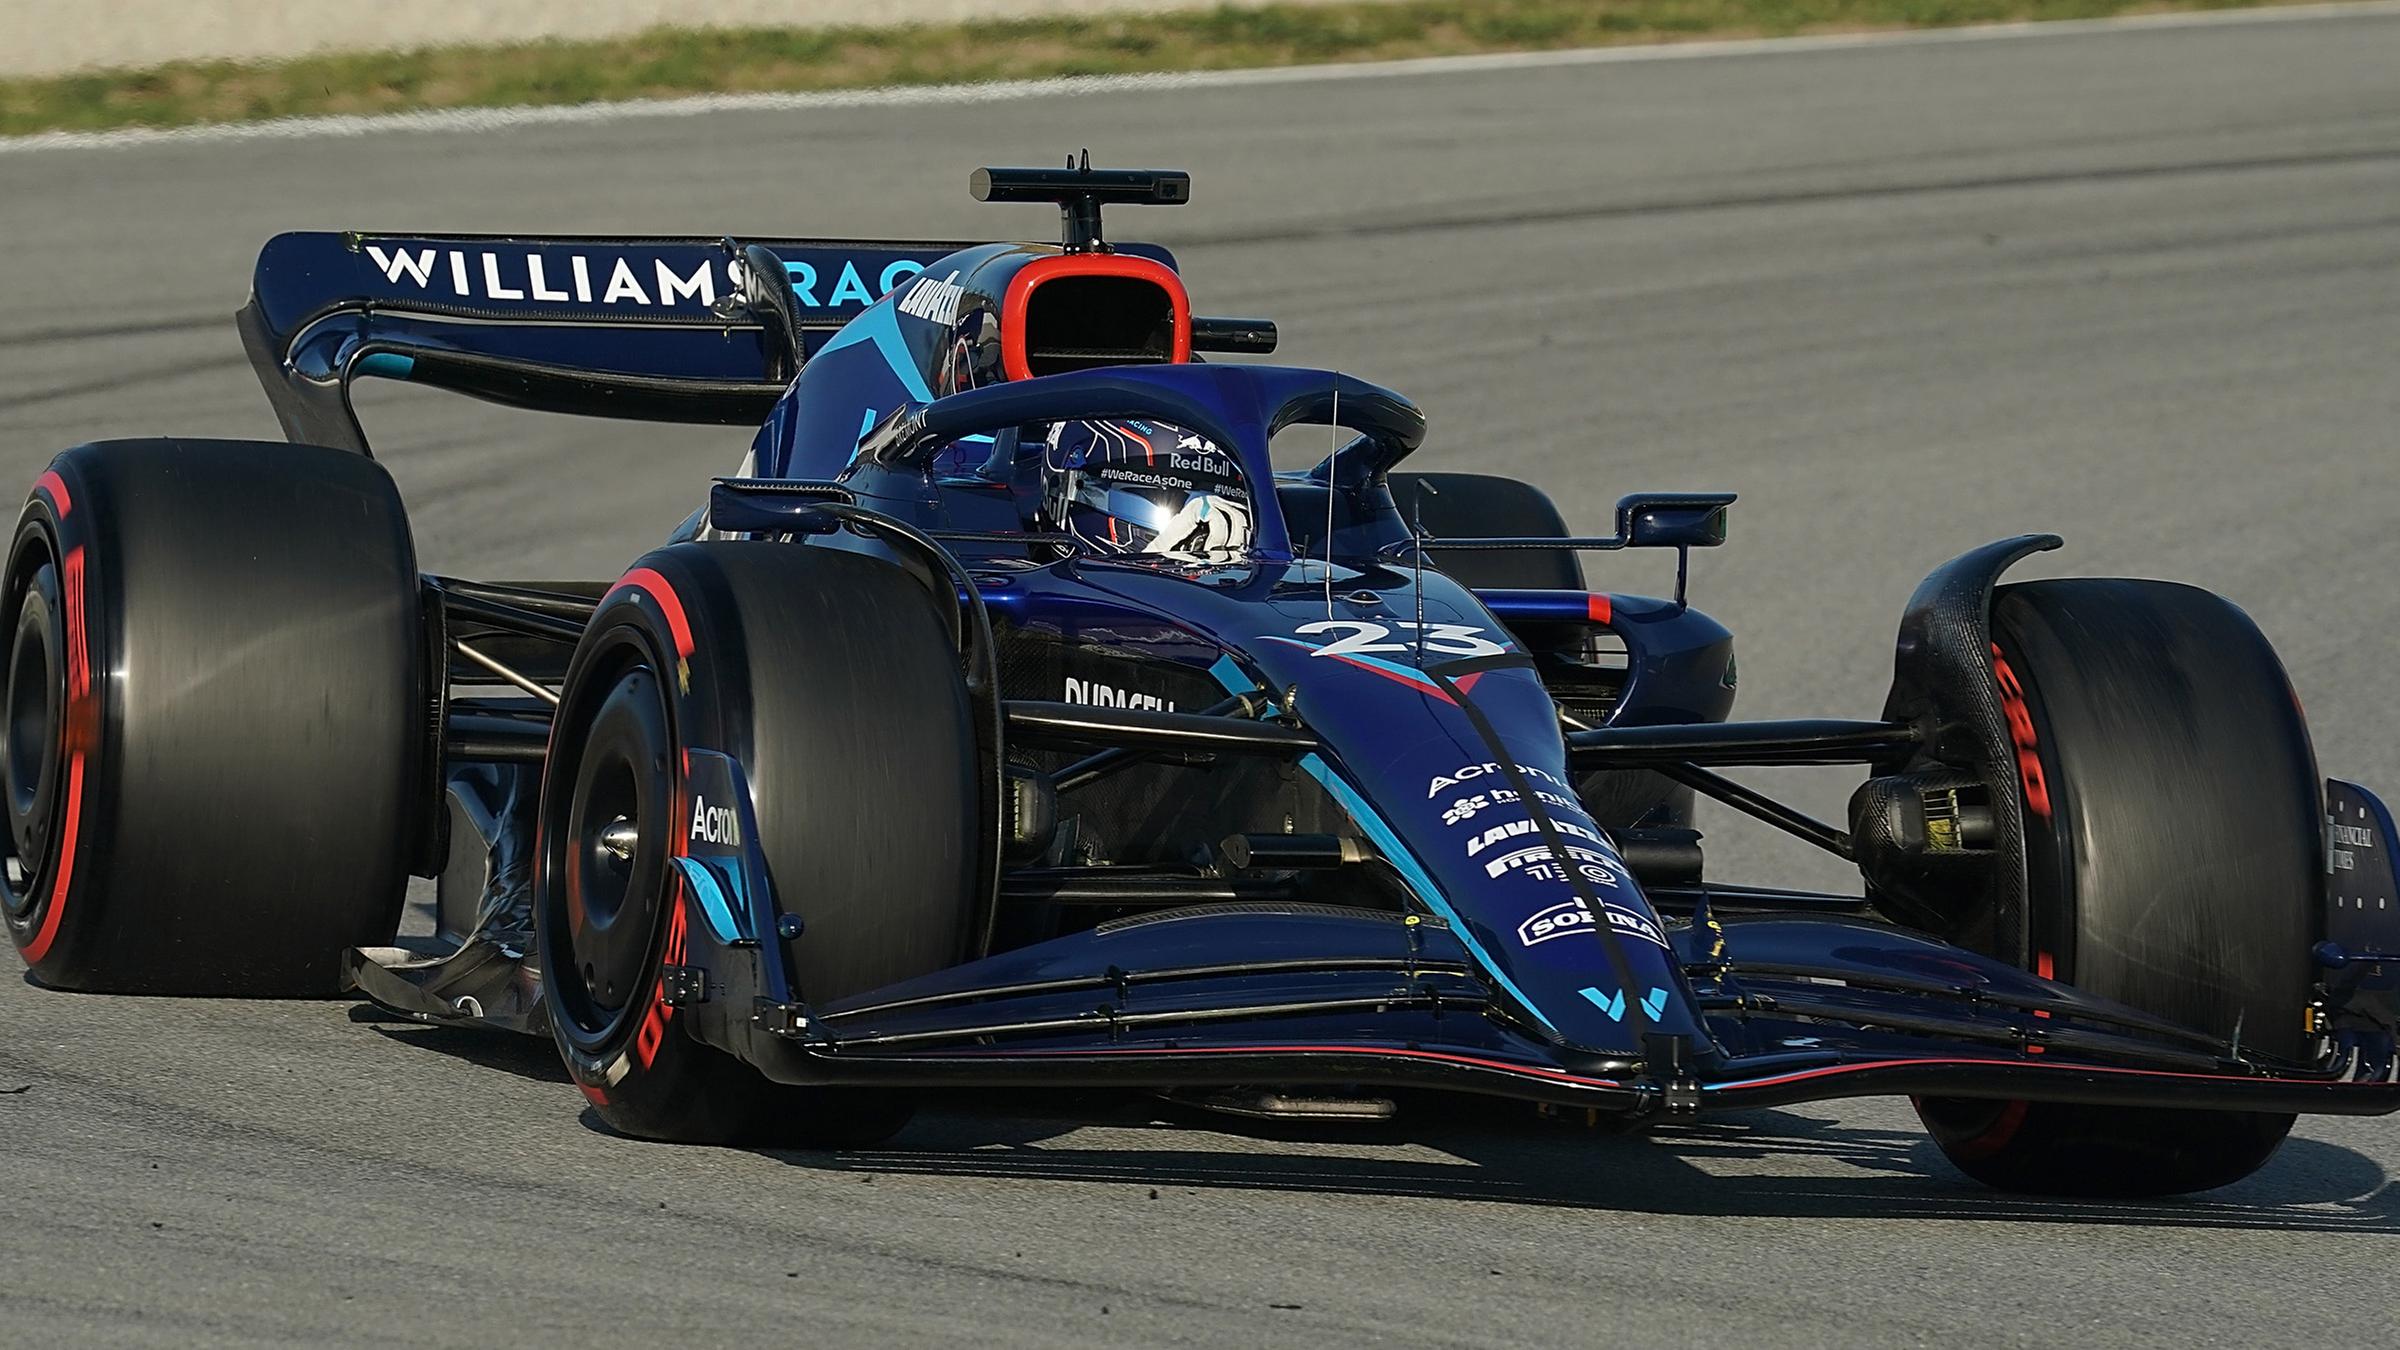 February 24, 2022, Spain, Barcelona: Test drives: Formula 1, test drives before the 2022 season, day 2: Team Williams' Alexander Albon from England on the track in Barcelona.